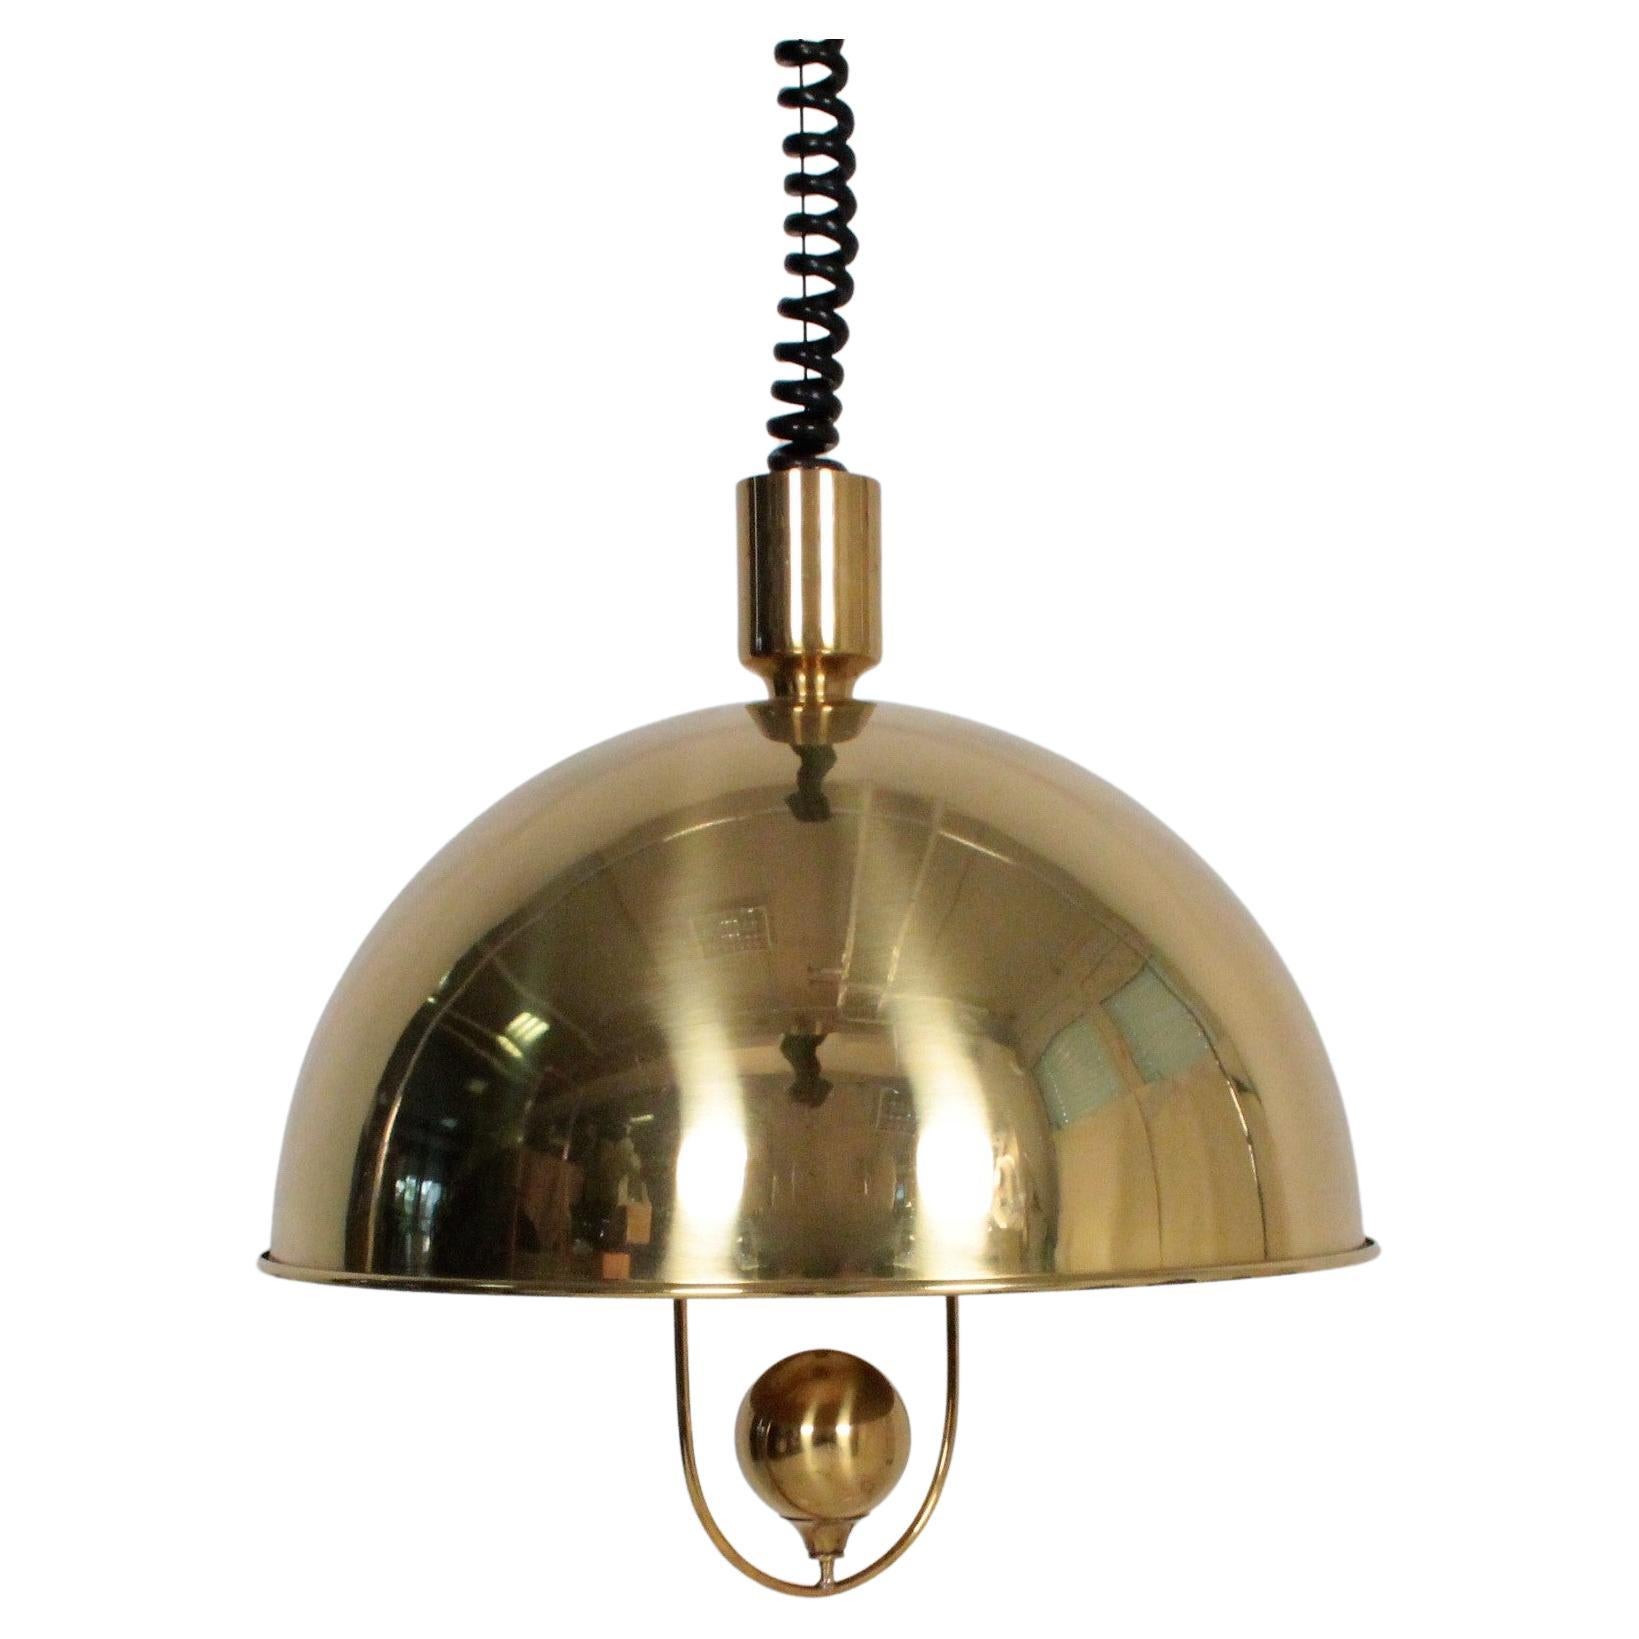 Florian Schulz Pendant Brass with Weight Light, Germany, 1970